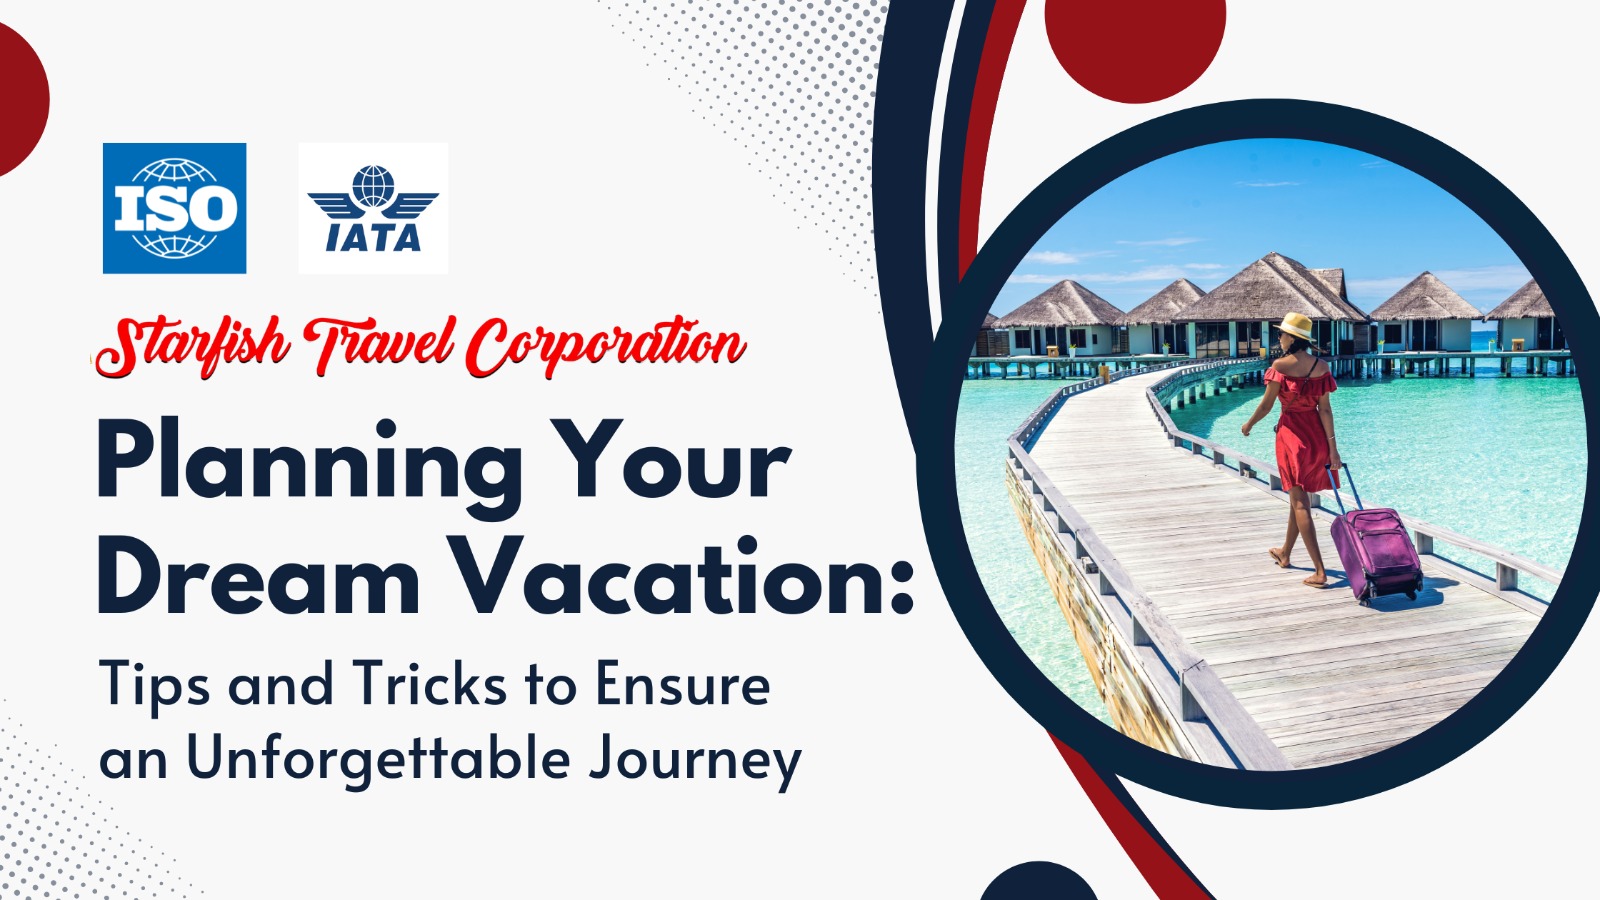 You are currently viewing Planning Your Dream Vacation: Tips and Tricks to Ensure an Unforgettable Journey